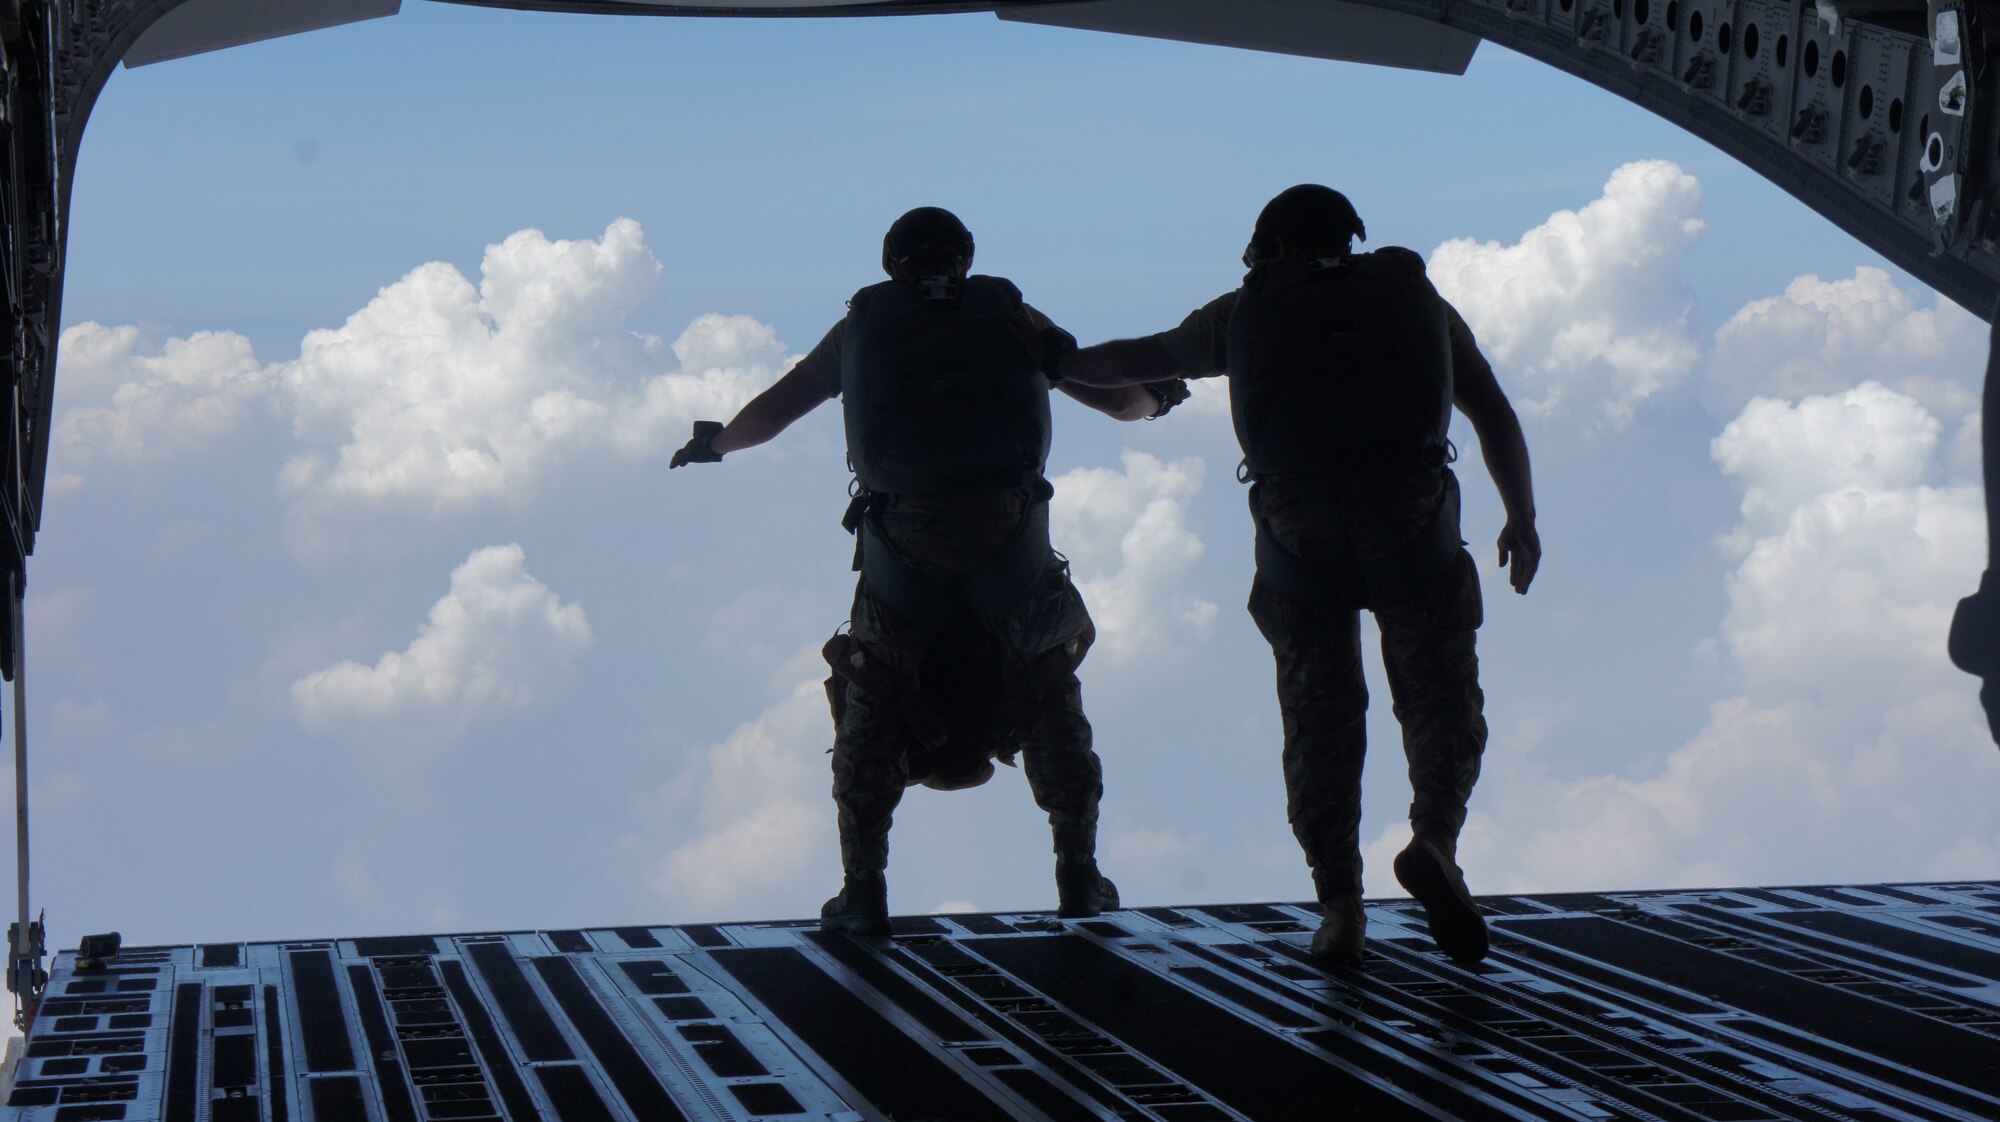 Pararescue jumpers with the 31st Rescue Squadron conduct a High Altitude Low Opening jump out of a a C-17 Globemaster III aircraft crewed by airmen from the 535th and 204th Airlift squadron during Balikatan 2016, Clark Air Field, Philippines, April 15, 2016. Balikatan, which means shoulder to shoulder in Filipino, is an annual bilateral training exercise aimed at improving the ability of Philippine and U.S. military forces to work together during planning, contingency and humanitarian assistance and disaster relief operations. (U.S. Air National Guard photo by Tech. Sgt. Andrew Jackson/released)
